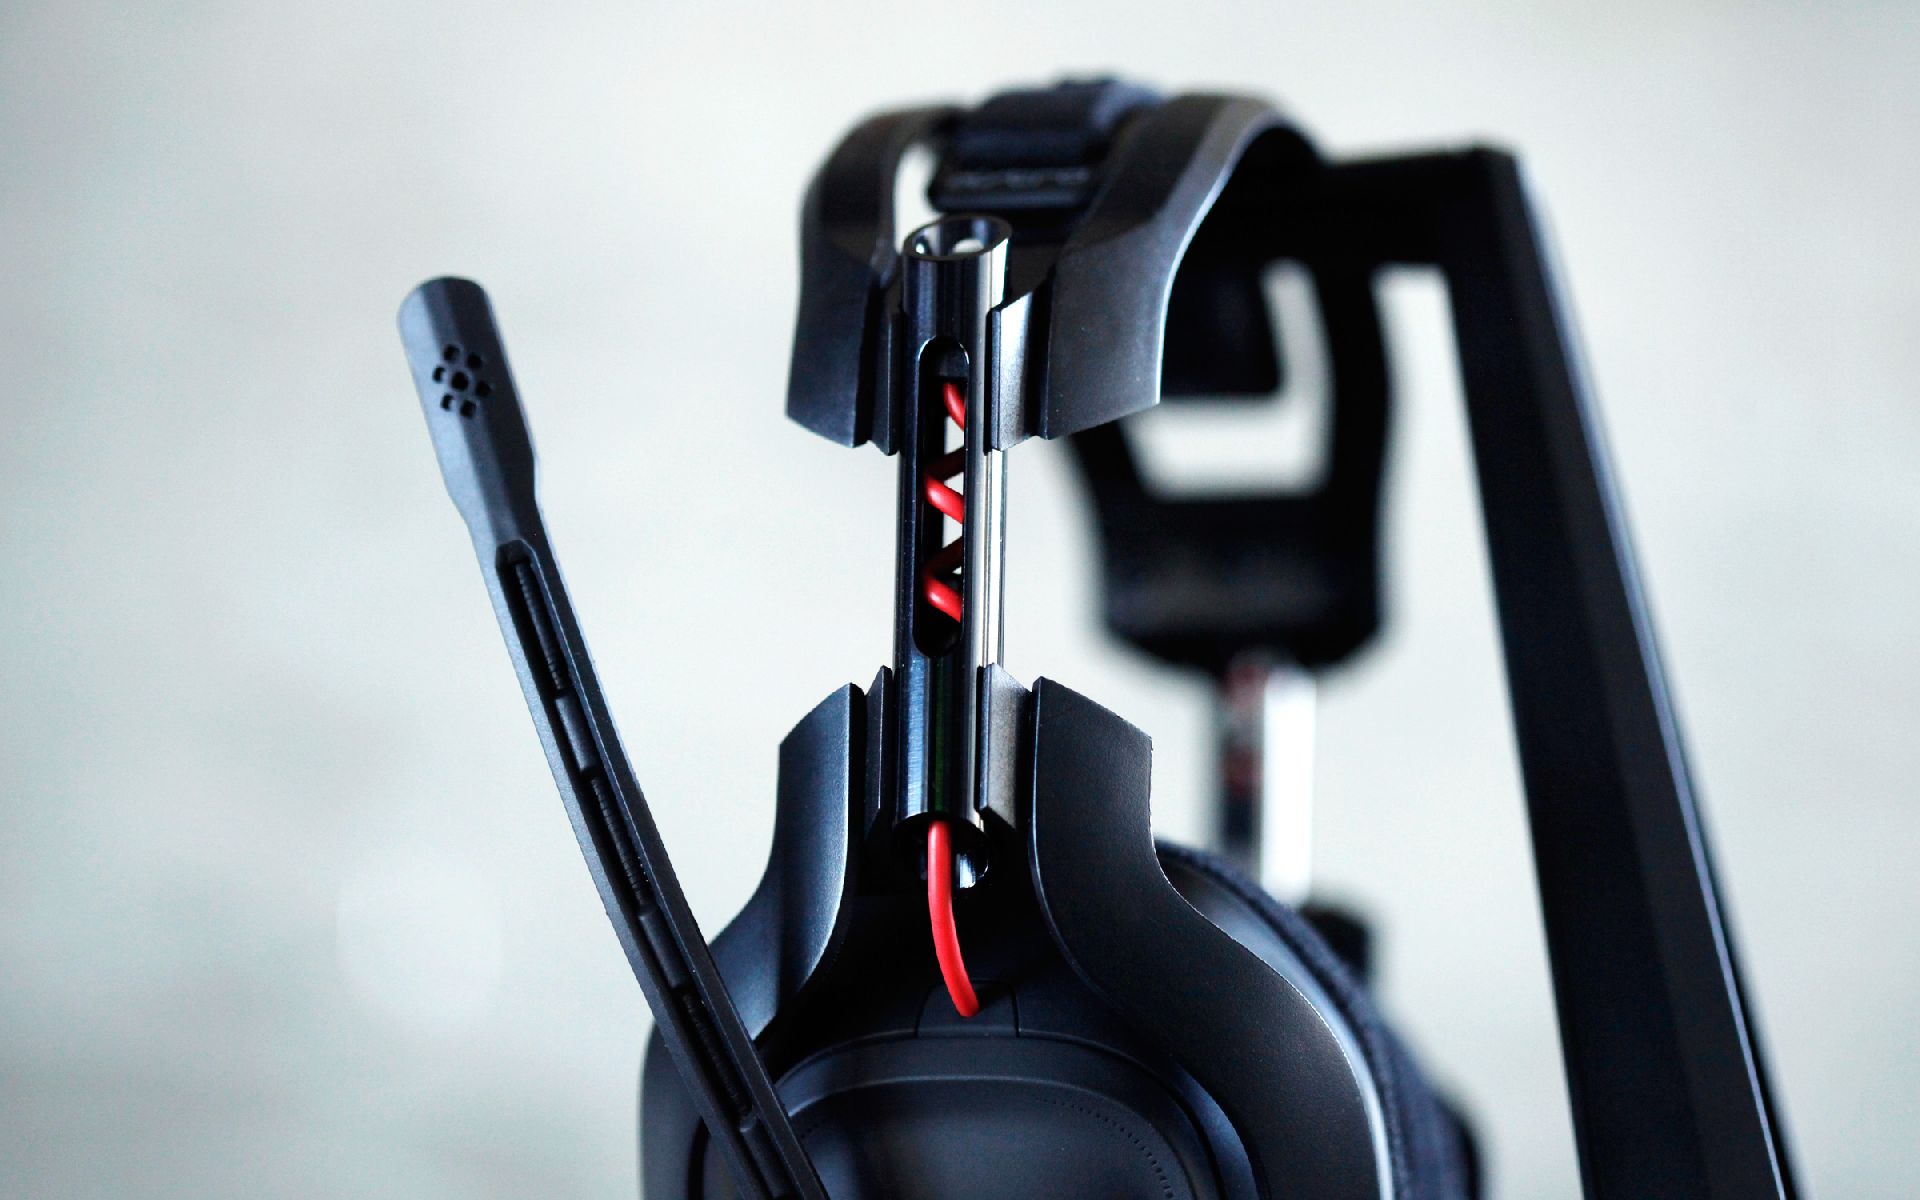 Astro Gaming Wallpaper Astro a50 wireless gaming